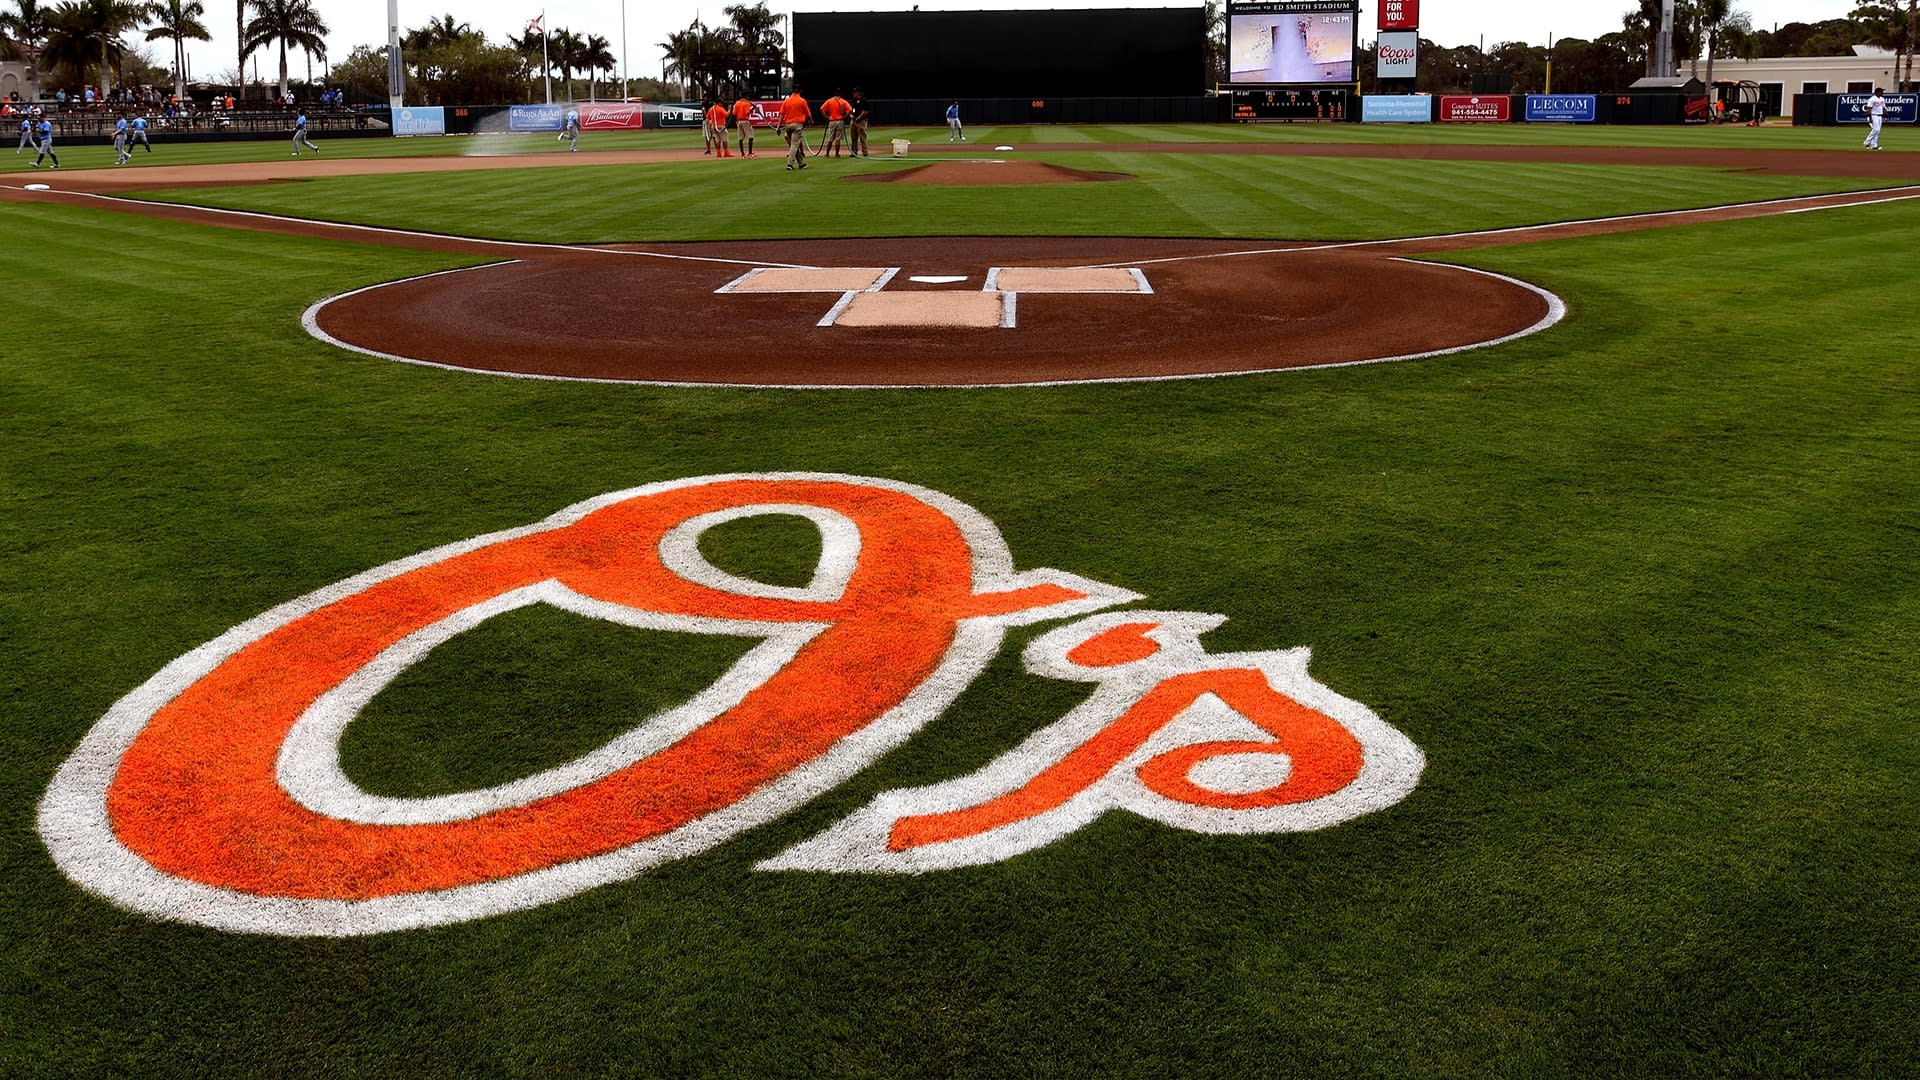 Mlb Opening Day 2022 Orioles Open Season At Home For 1st Time Since 2018 Vs Toronto